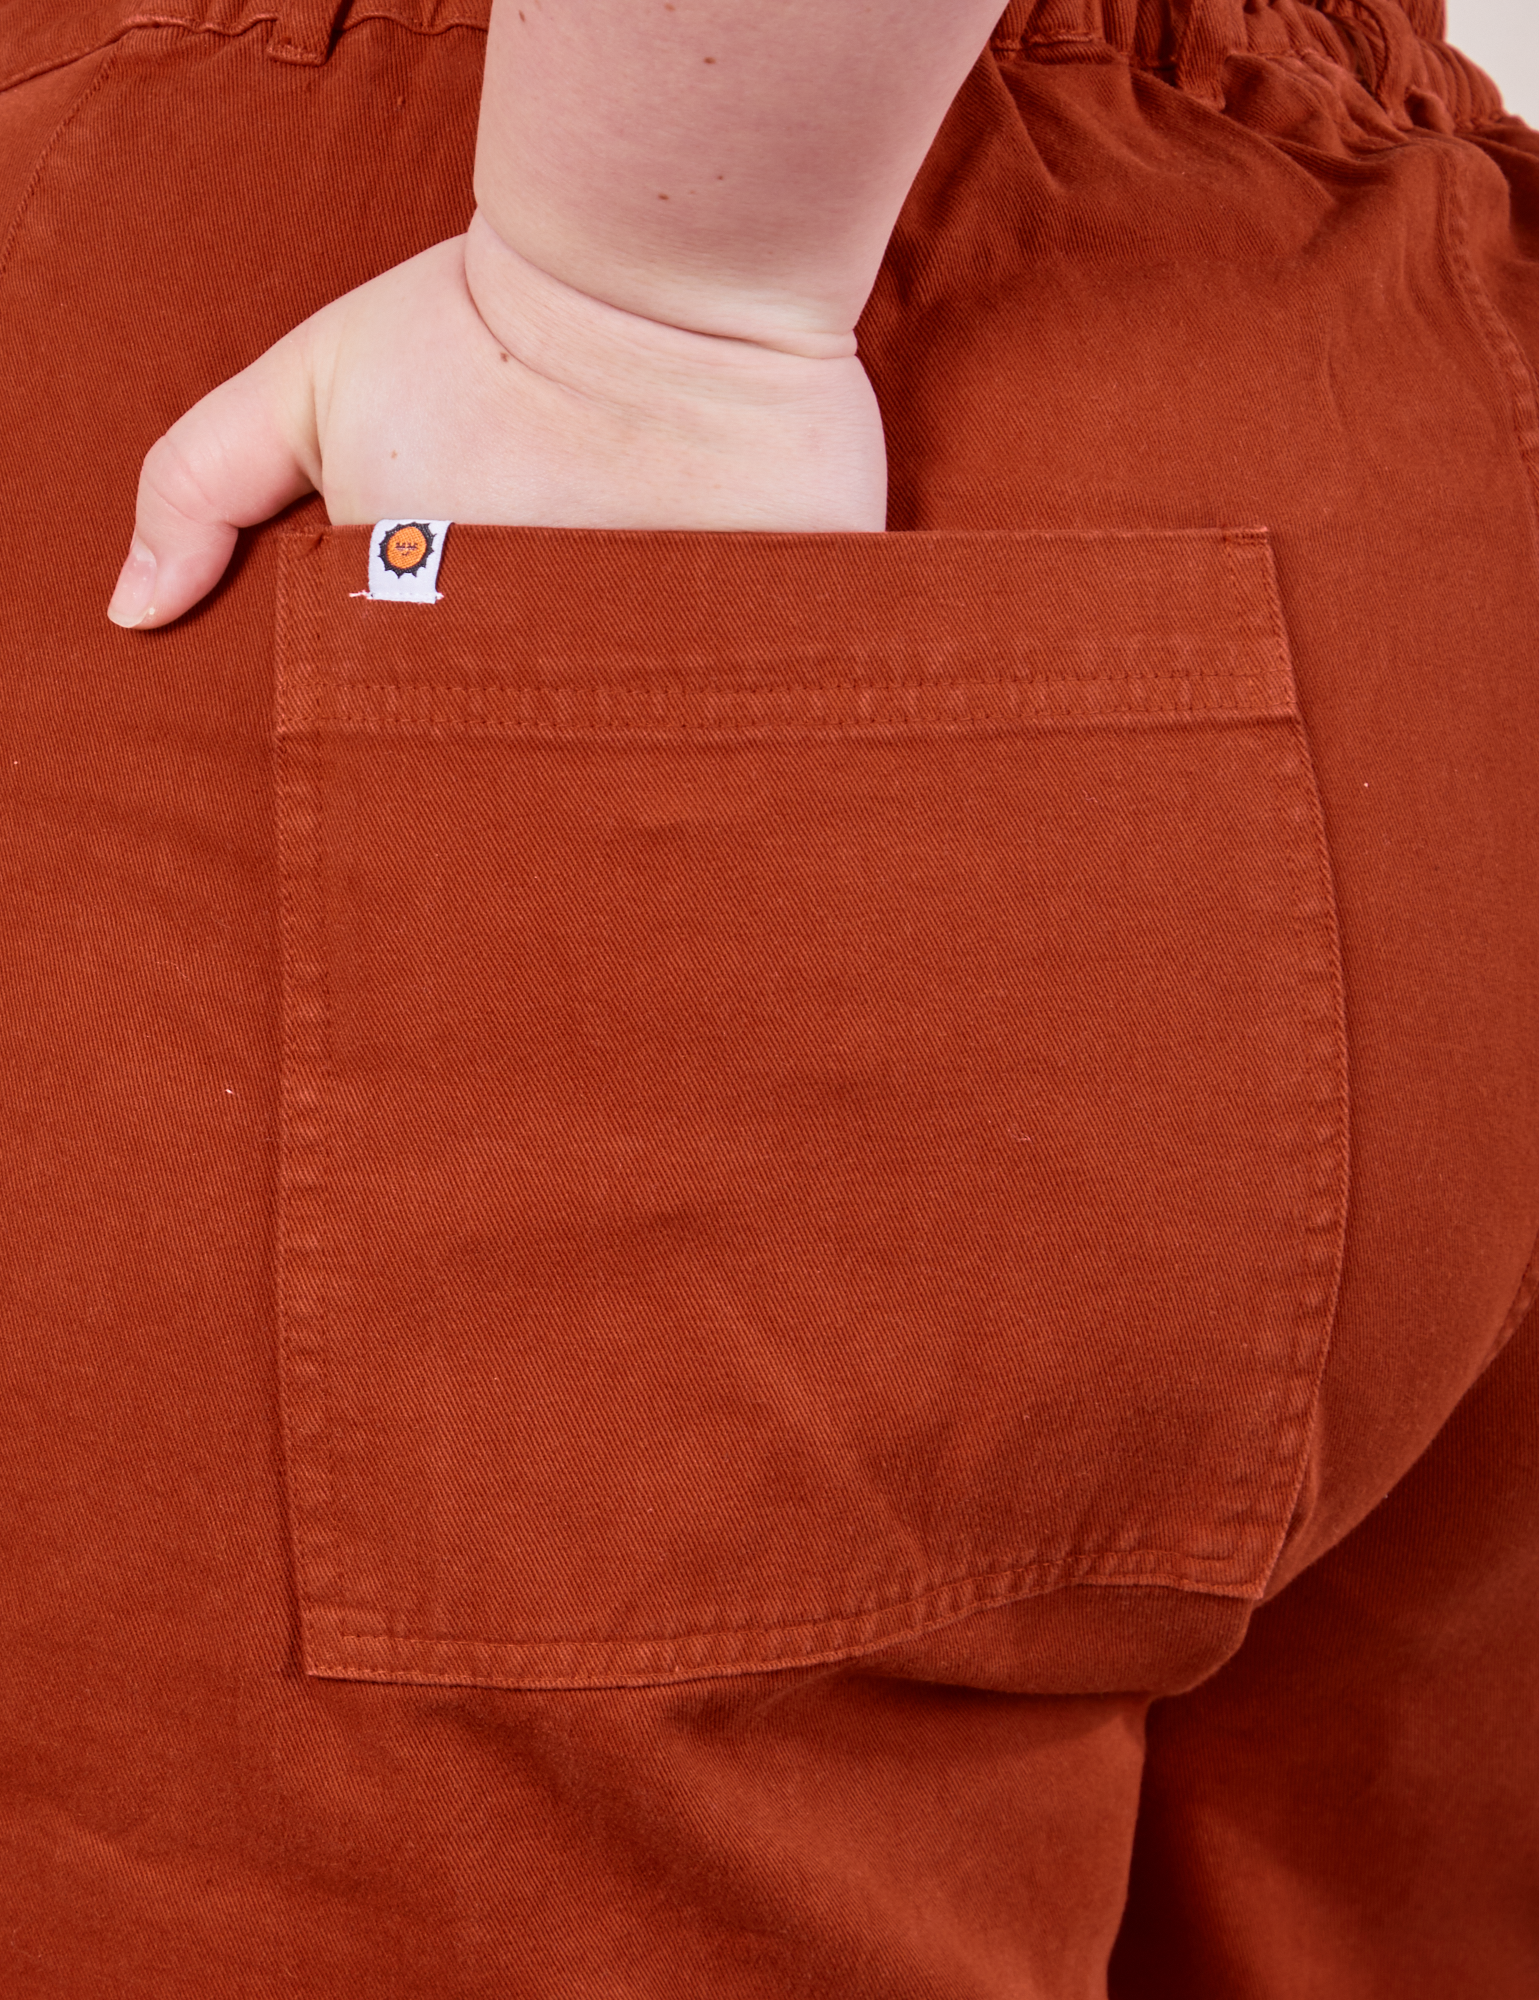 Classic Work Shorts in Paprika back pocket close up. Ashley has her hand in the pocket.